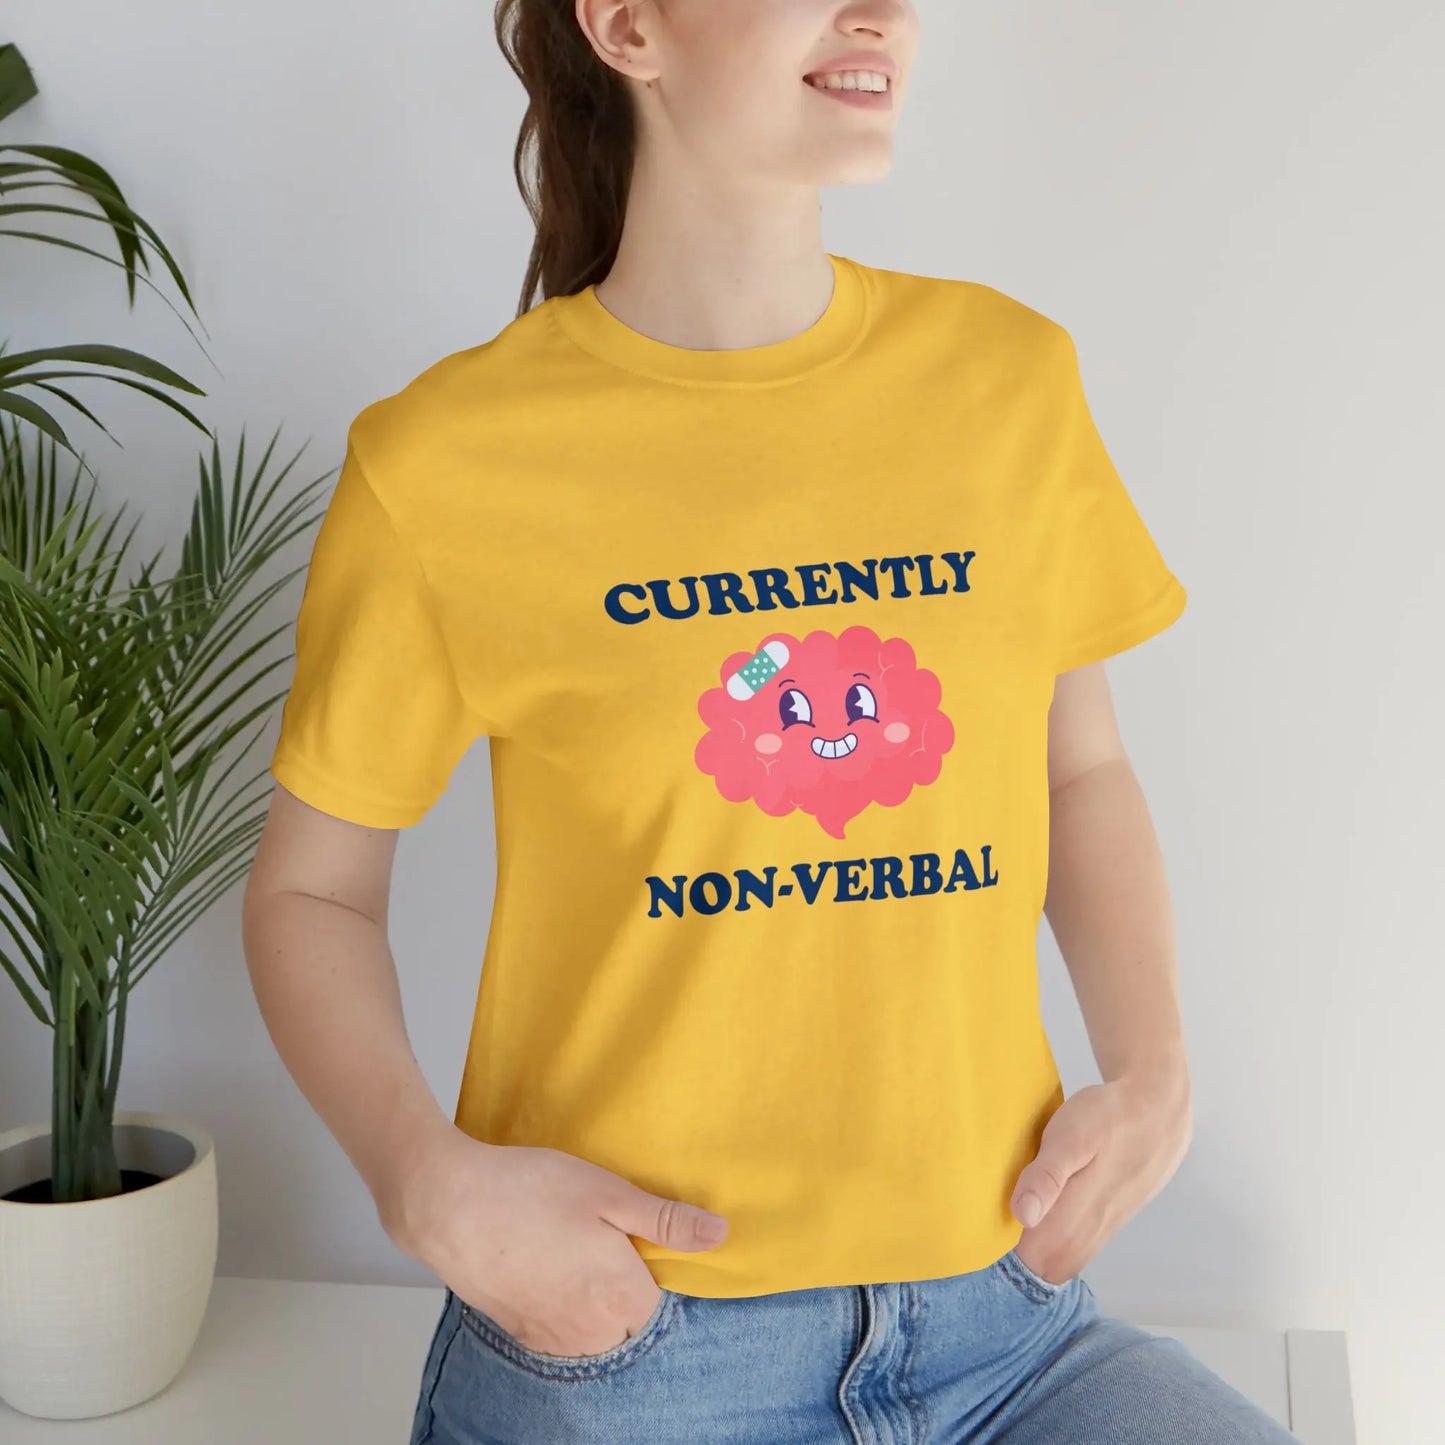 Currently Non-Verbal T-Shirt